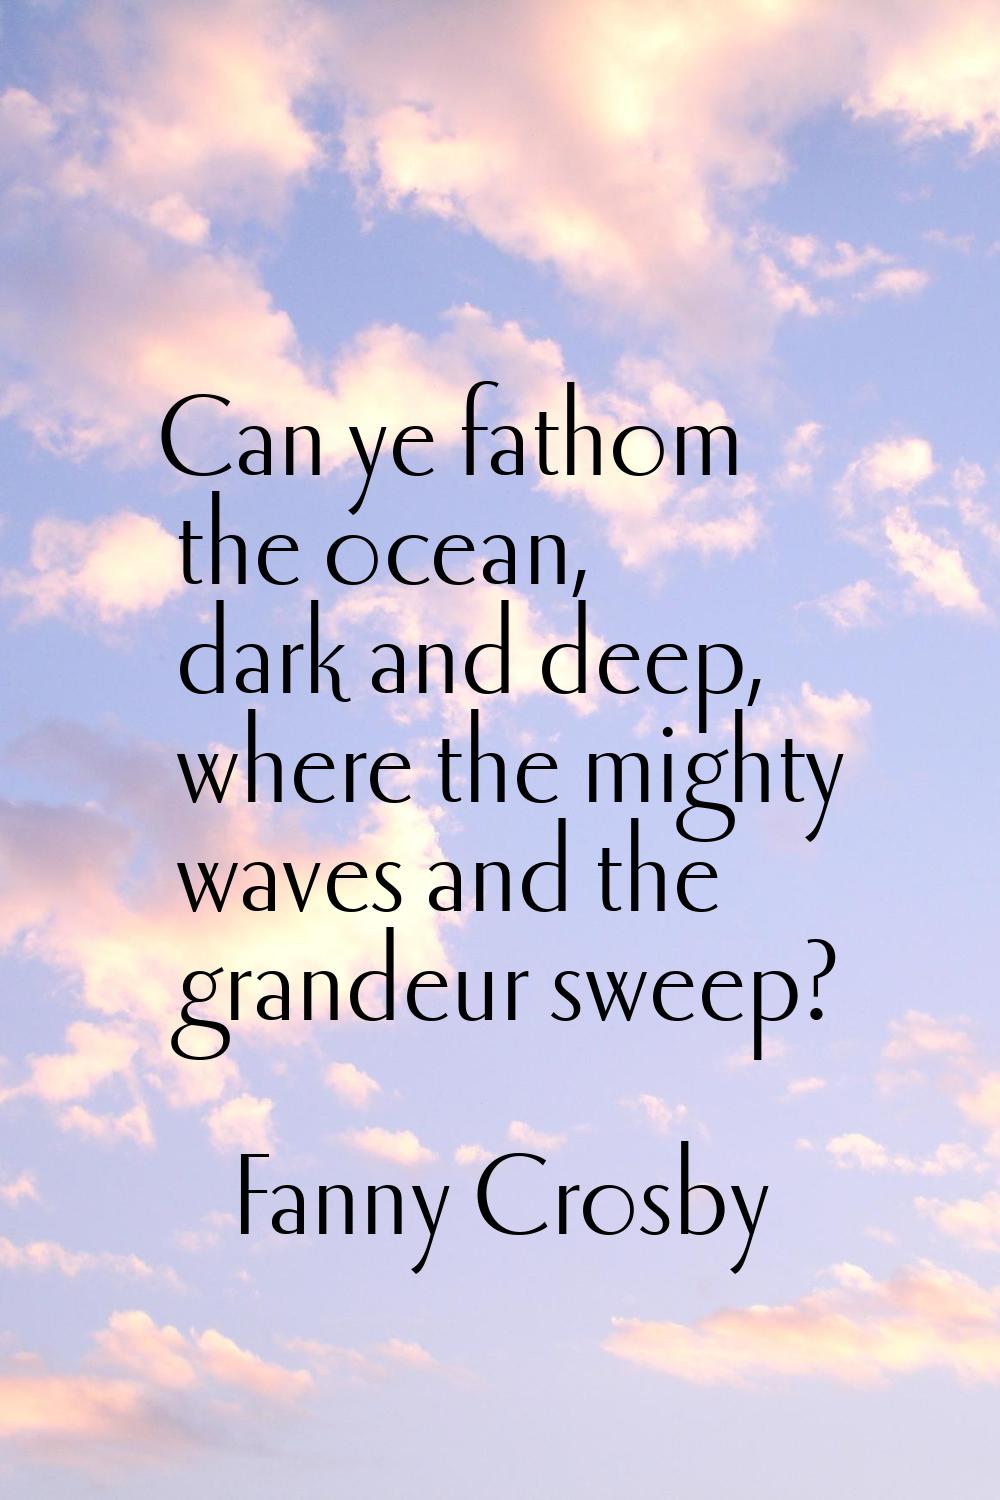 Can ye fathom the ocean, dark and deep, where the mighty waves and the grandeur sweep?